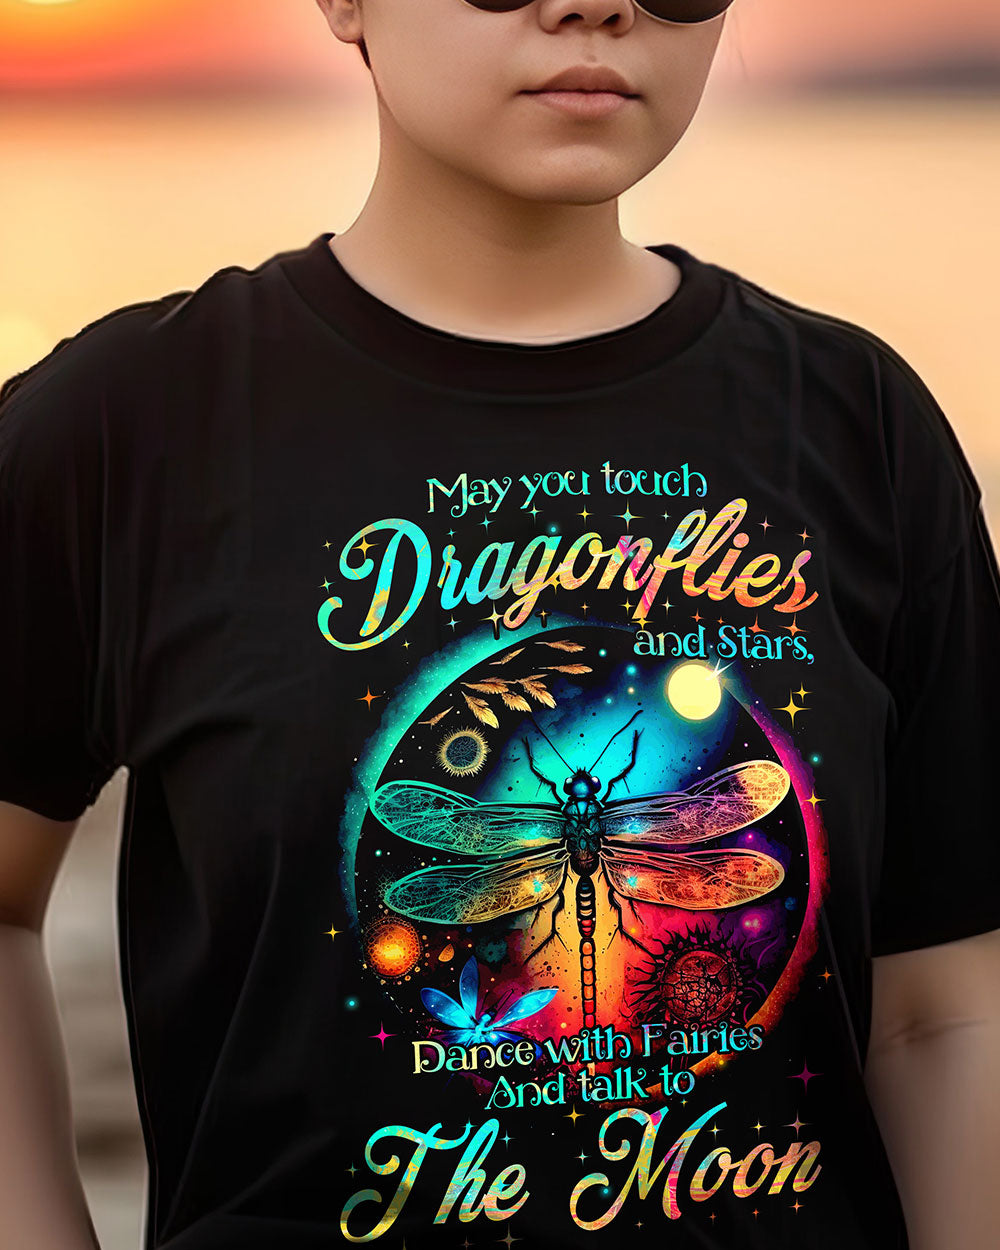 MAY YOU TOUCH DRAGONFLIES AND STARS COTTON SHIRT - TYTM0404232